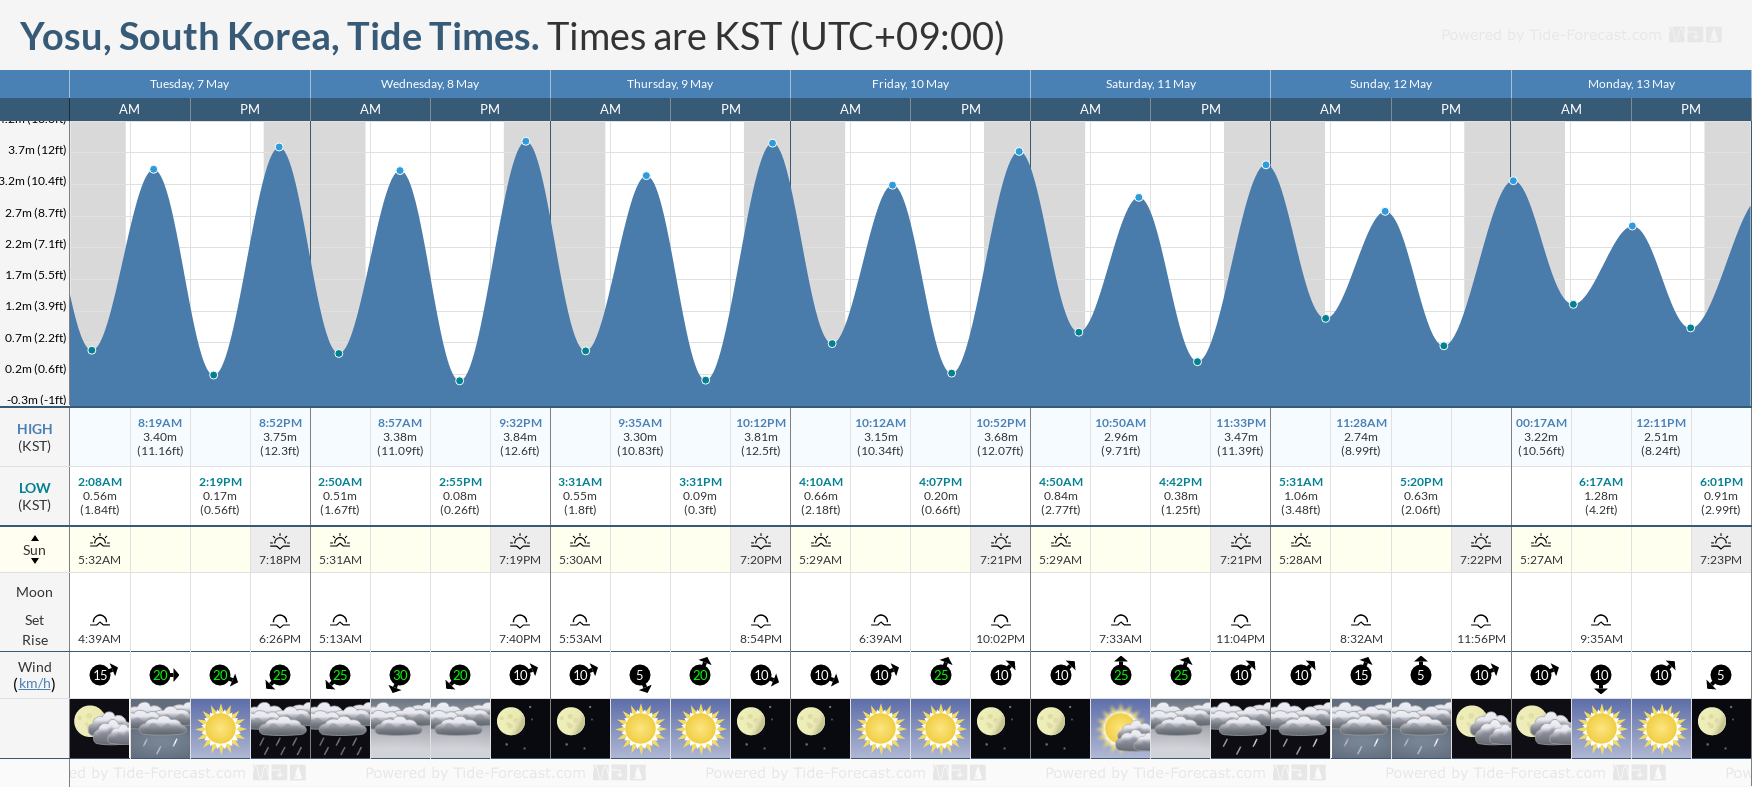 Yosu, South Korea Tide Chart including high and low tide tide times for the next 7 days